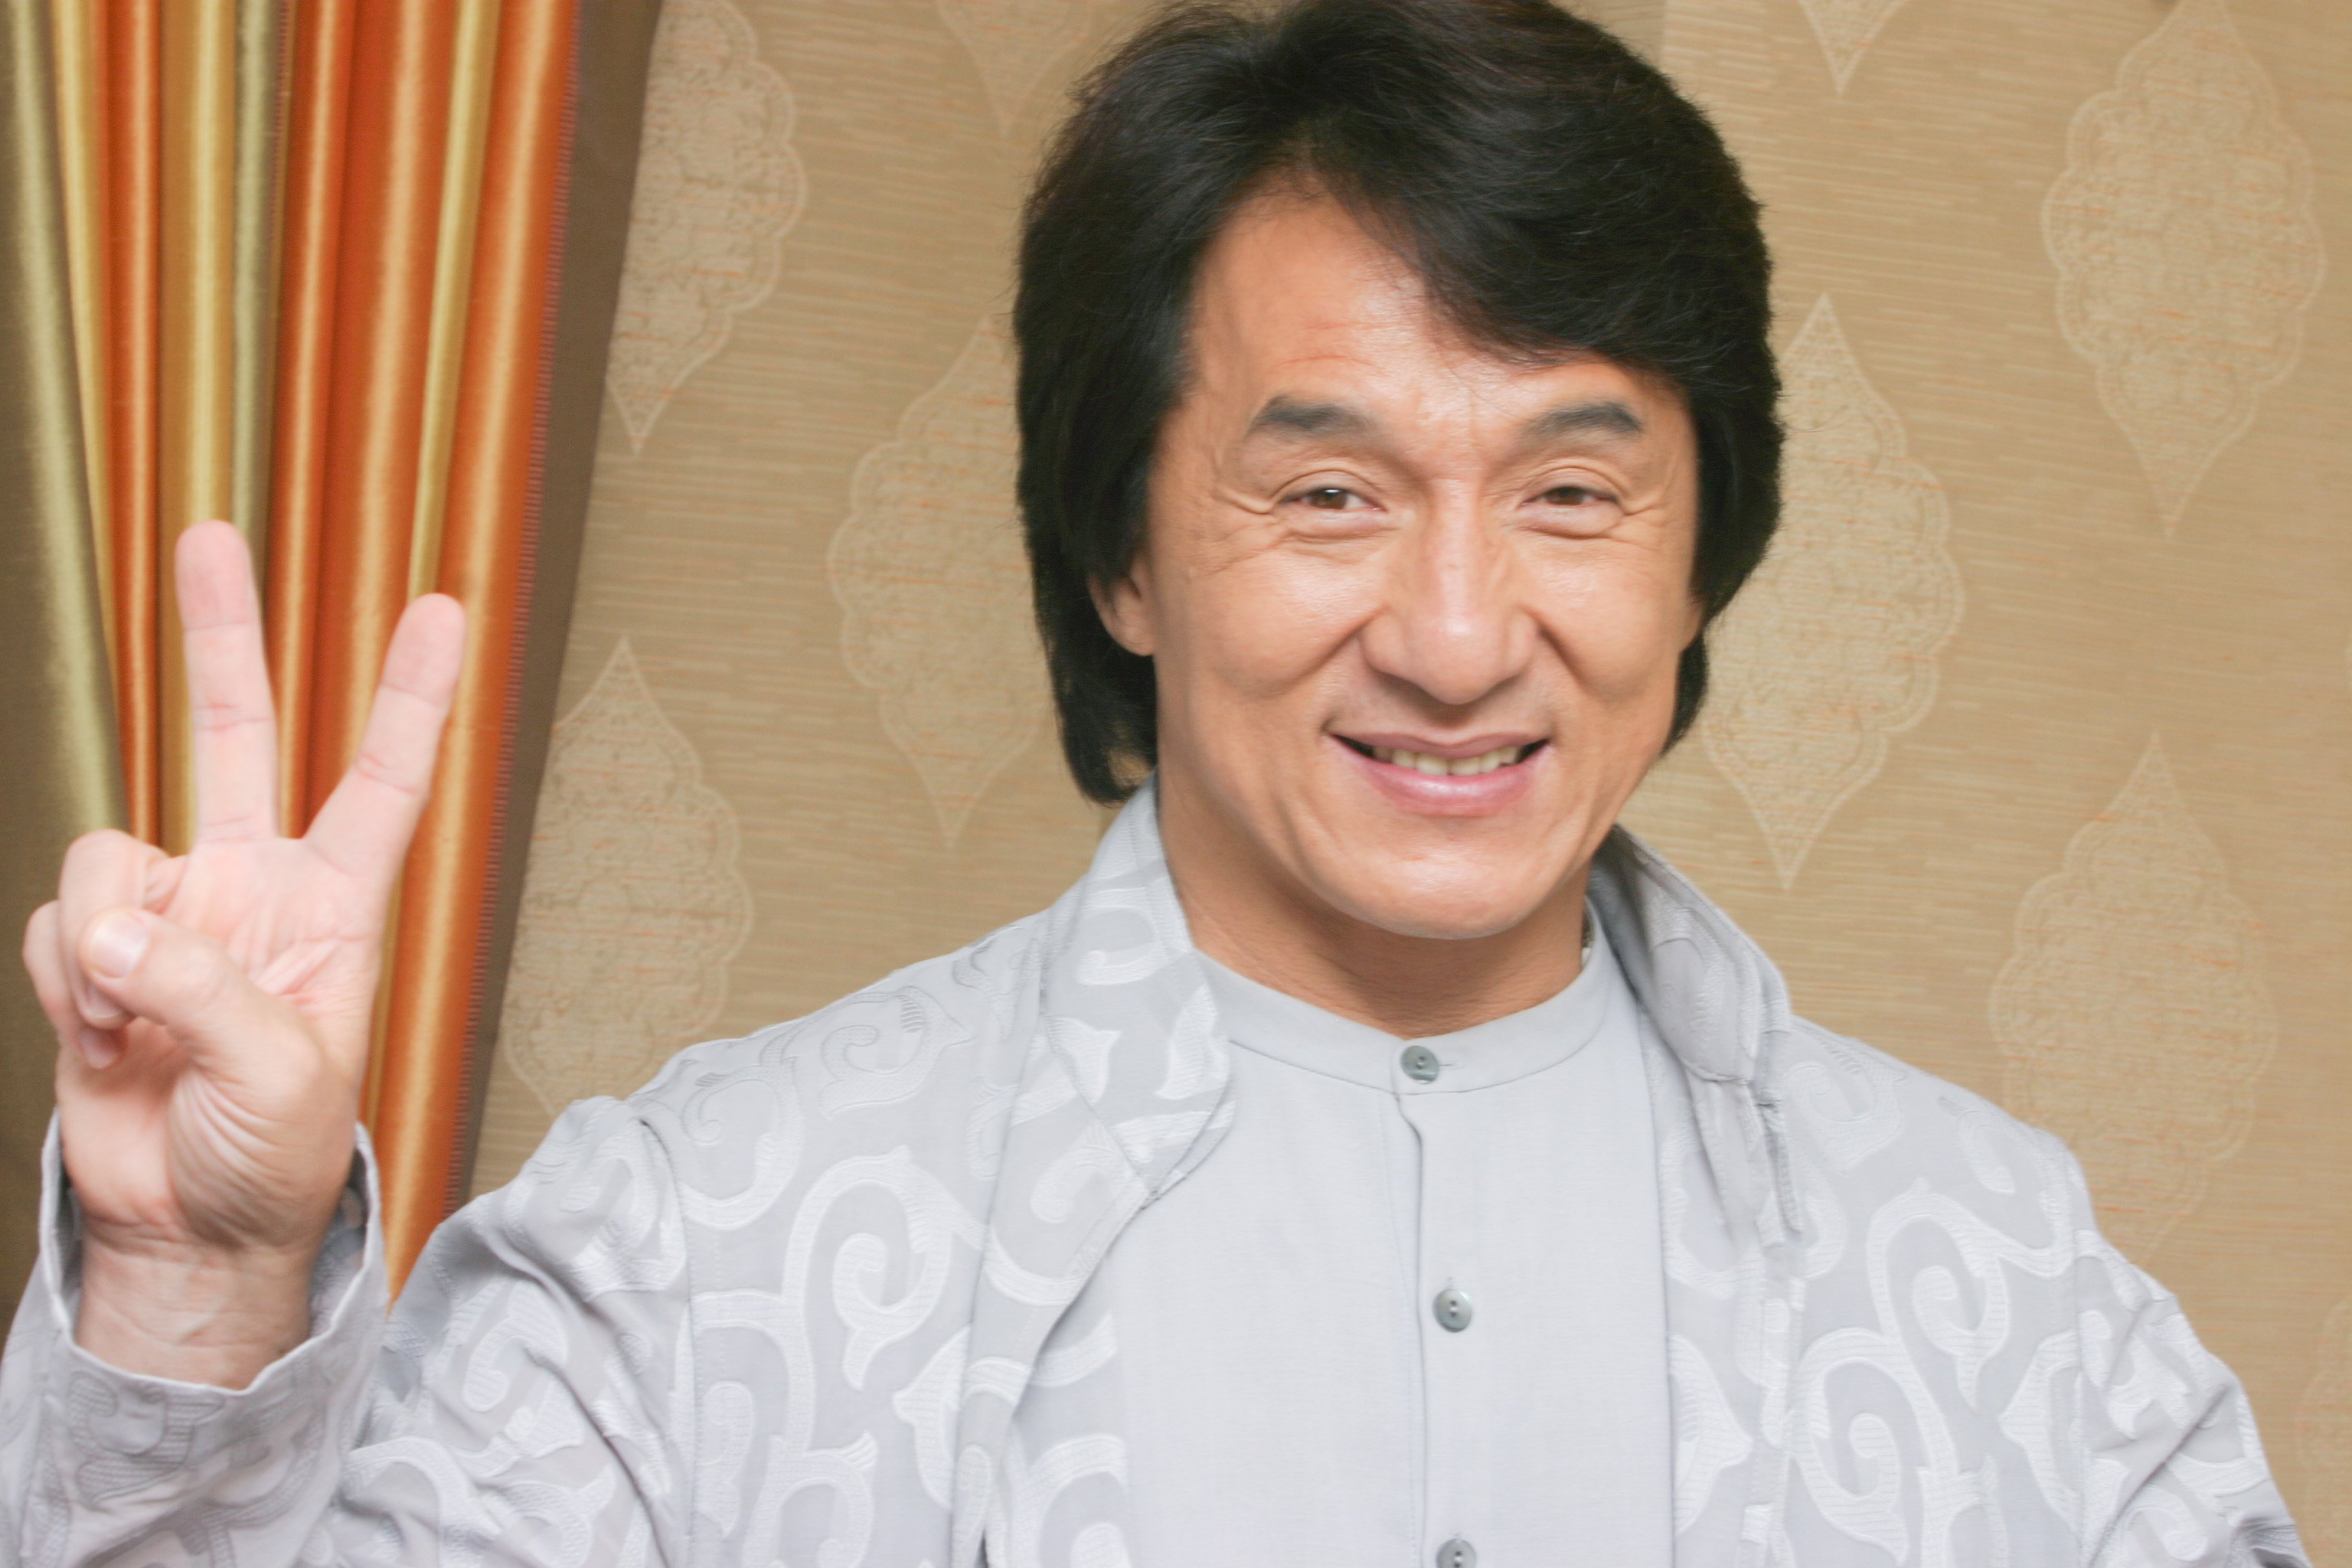 Jackie Chan photo 6 of 47 pics, wallpaper - photo #123374 - ThePlace2